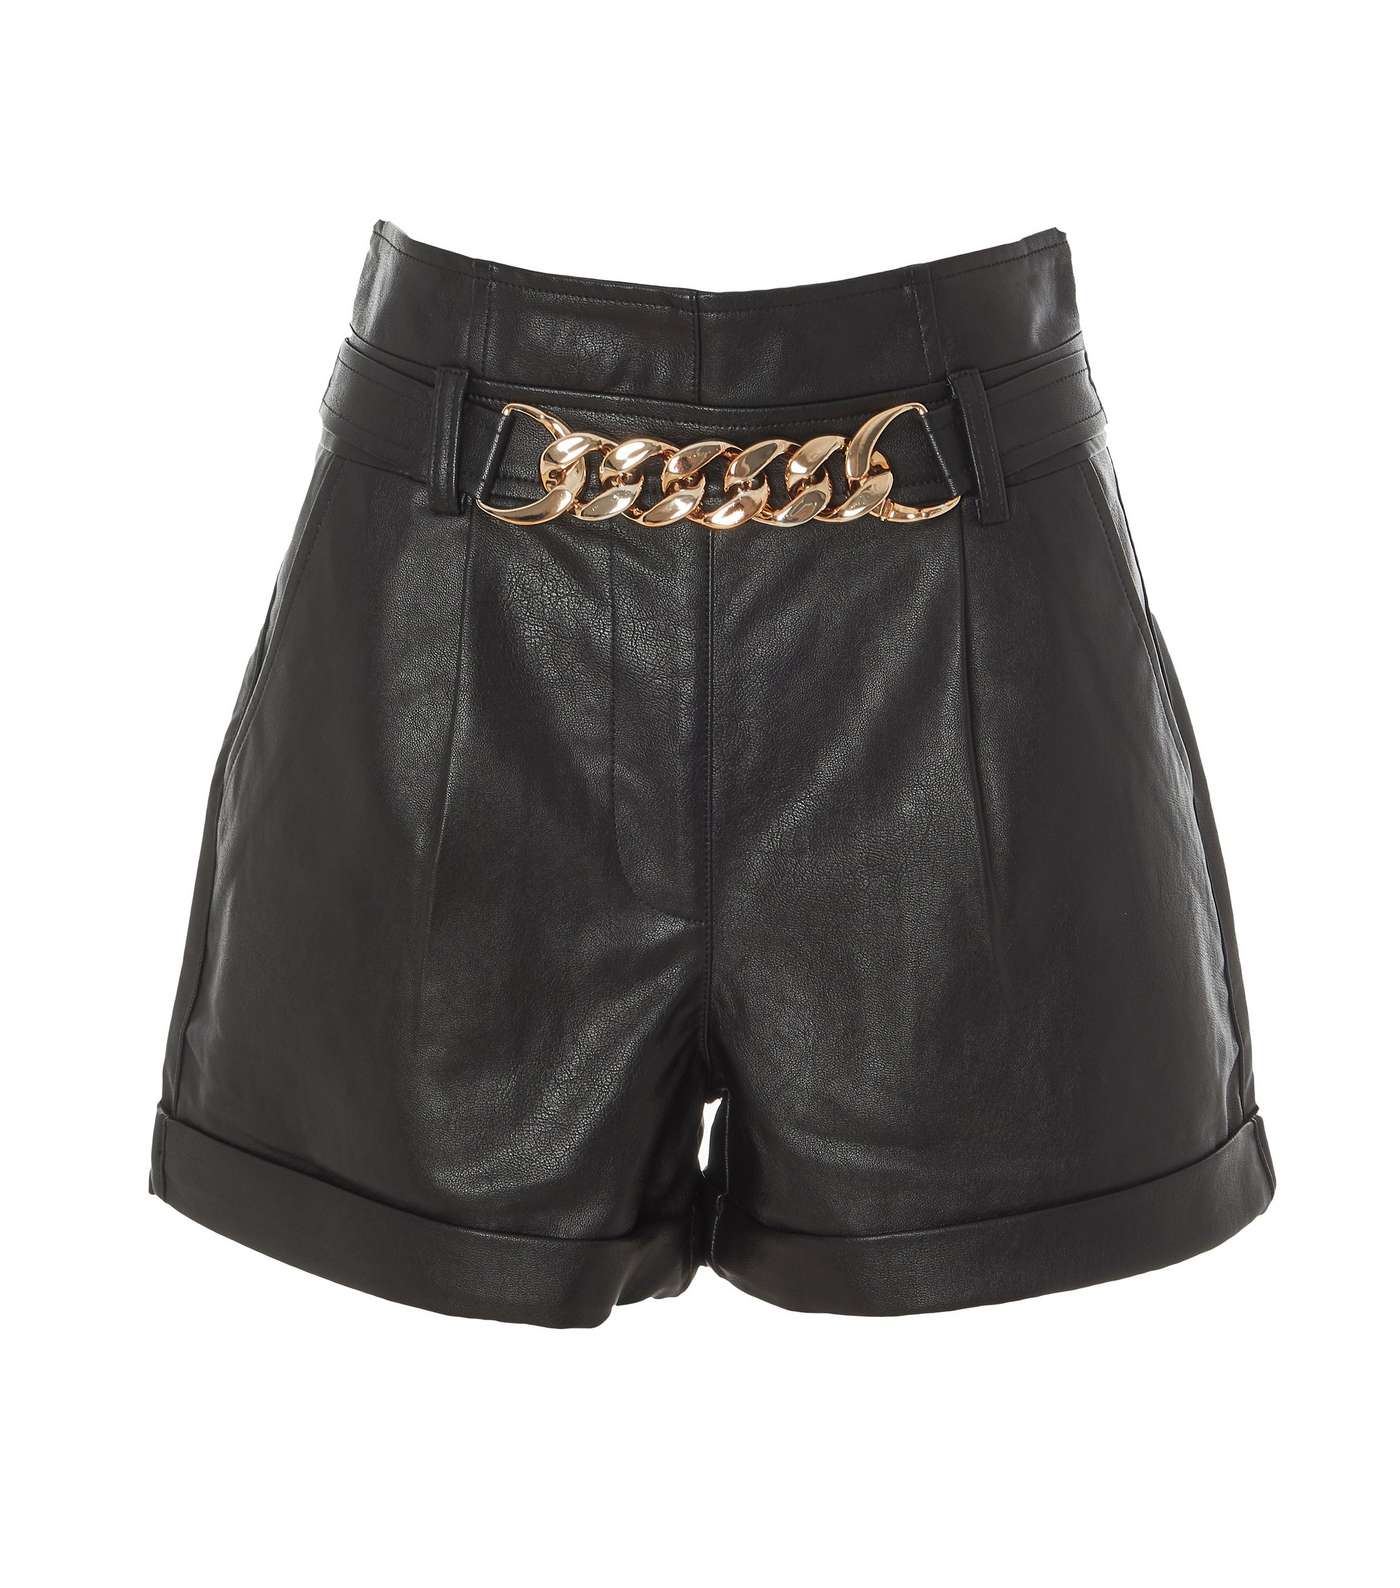 QUIZ Black Leather-Look Chain Belted Shorts Image 4